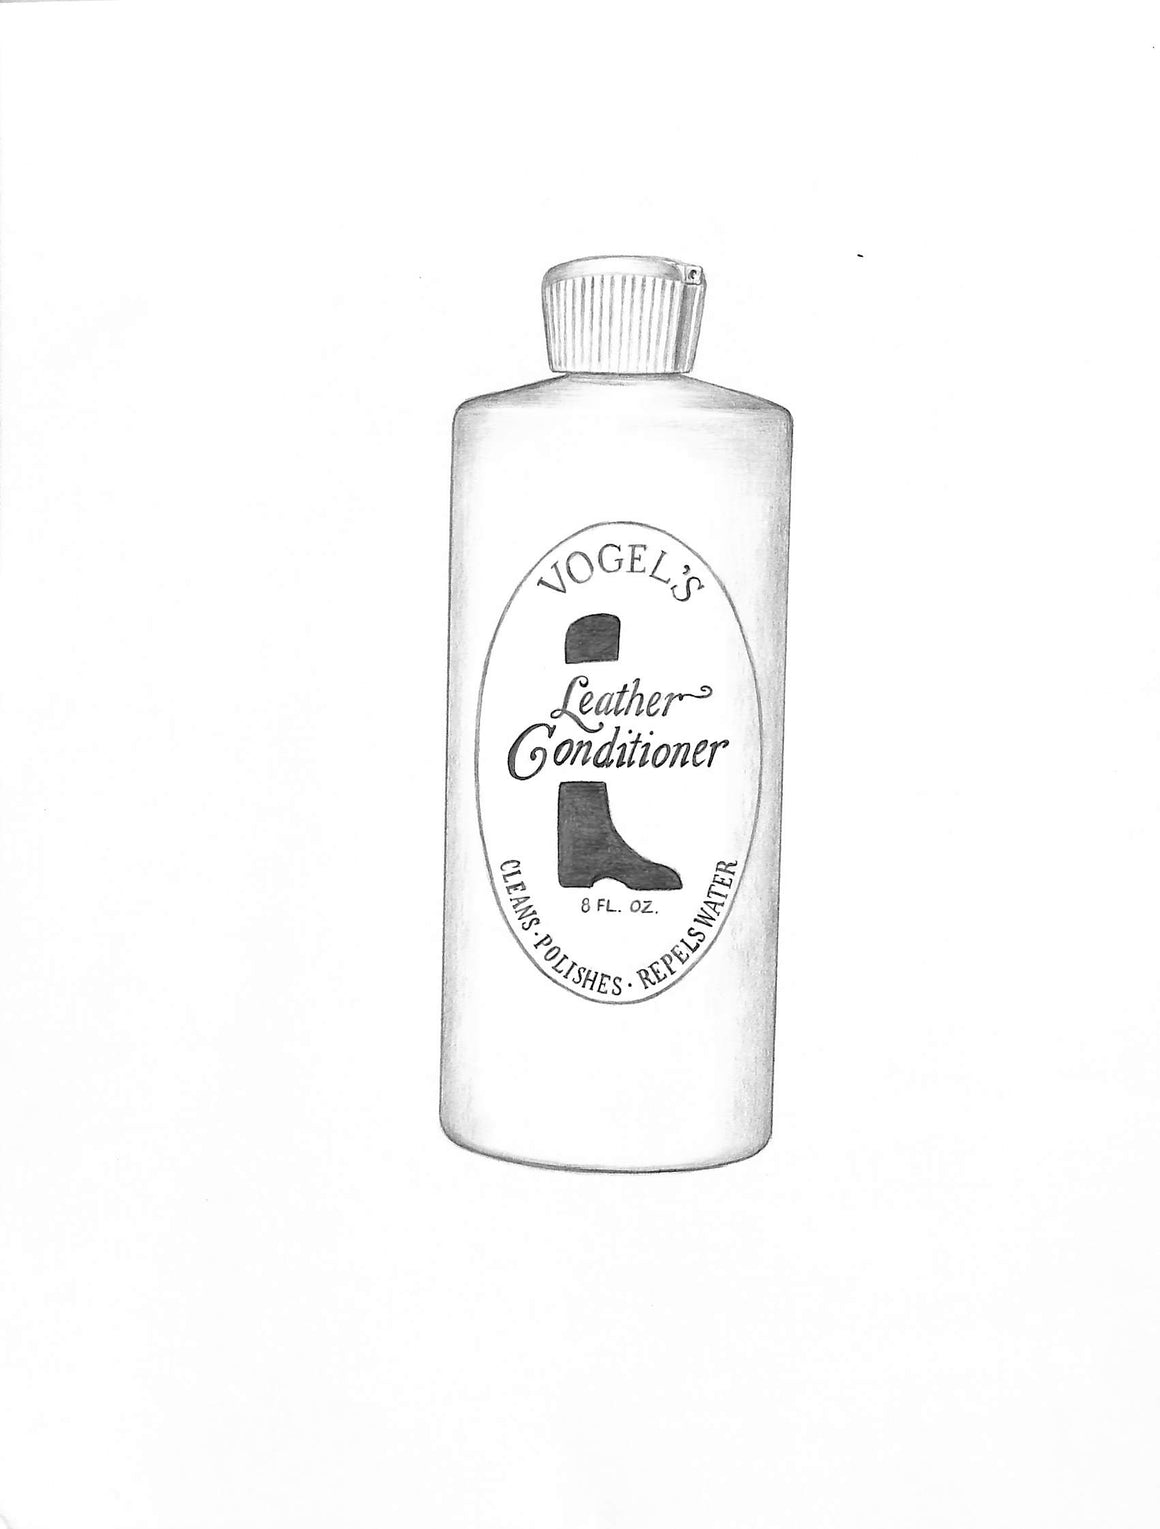 Vogel's Leather Conditioner Graphite Drawing